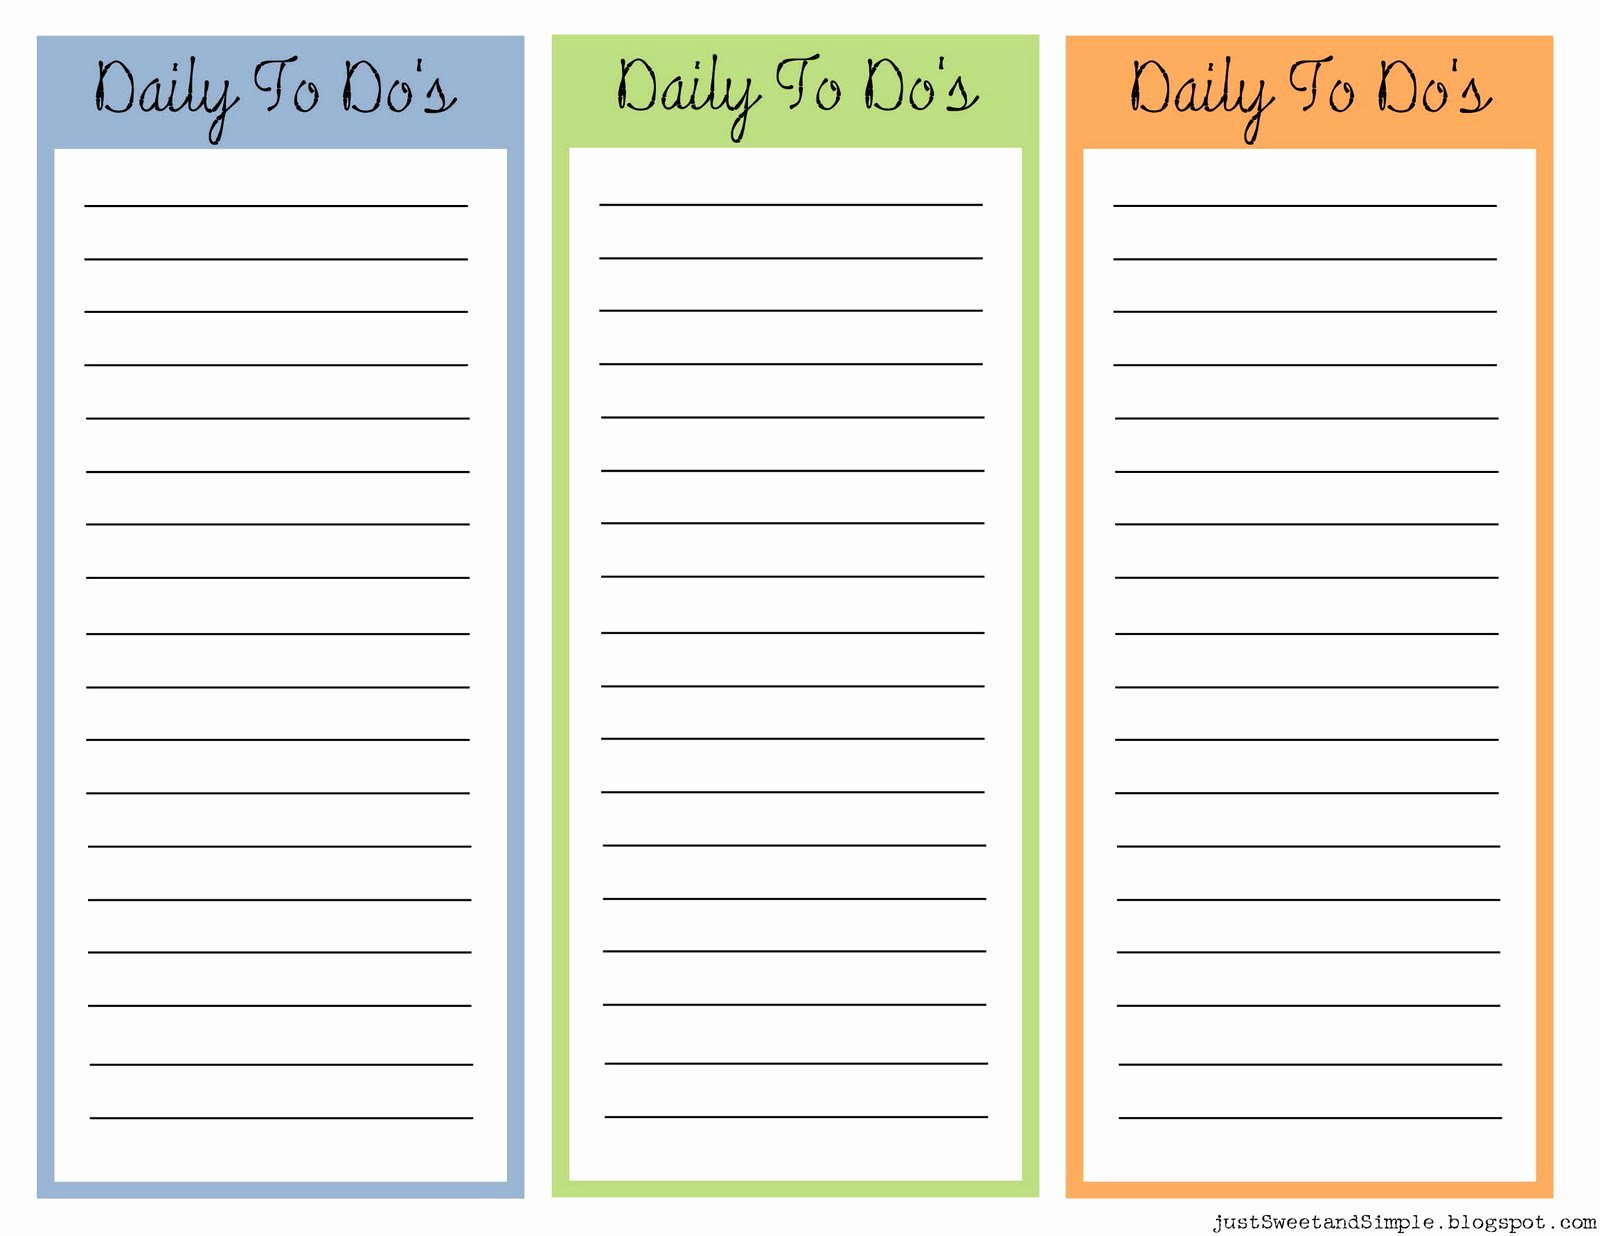 Daily to Do List Template New Just Sweet and Simple Printable Little Daily to Do List S